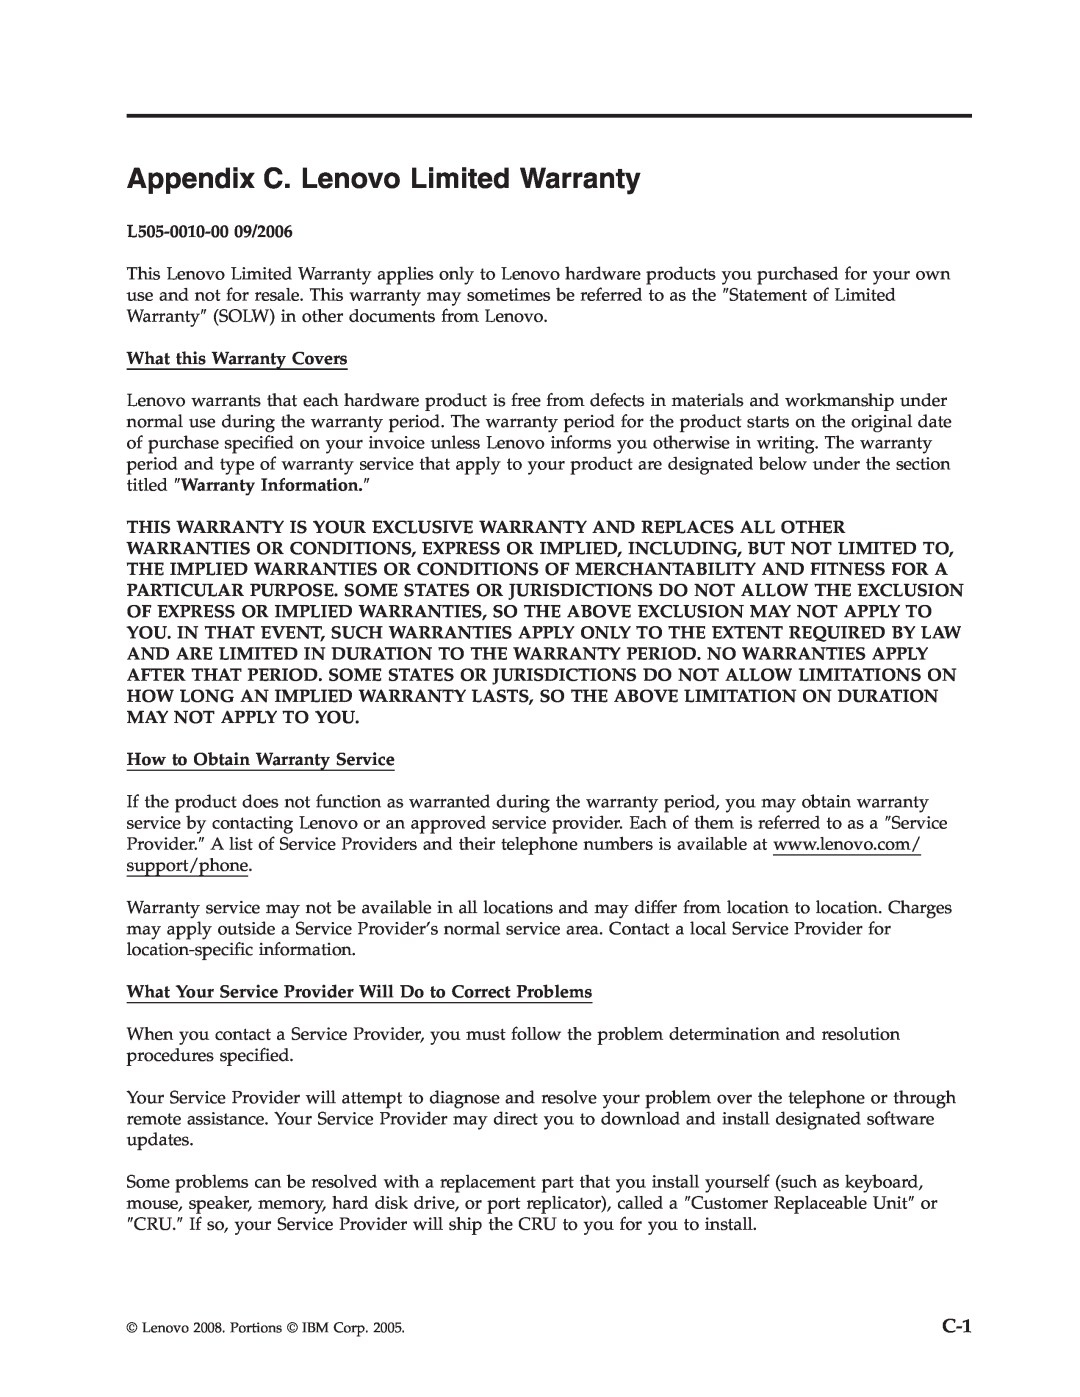 Lenovo 43N3224 manual Appendix C. Lenovo Limited Warranty, L505-0010-0009/2006, What this Warranty Covers 